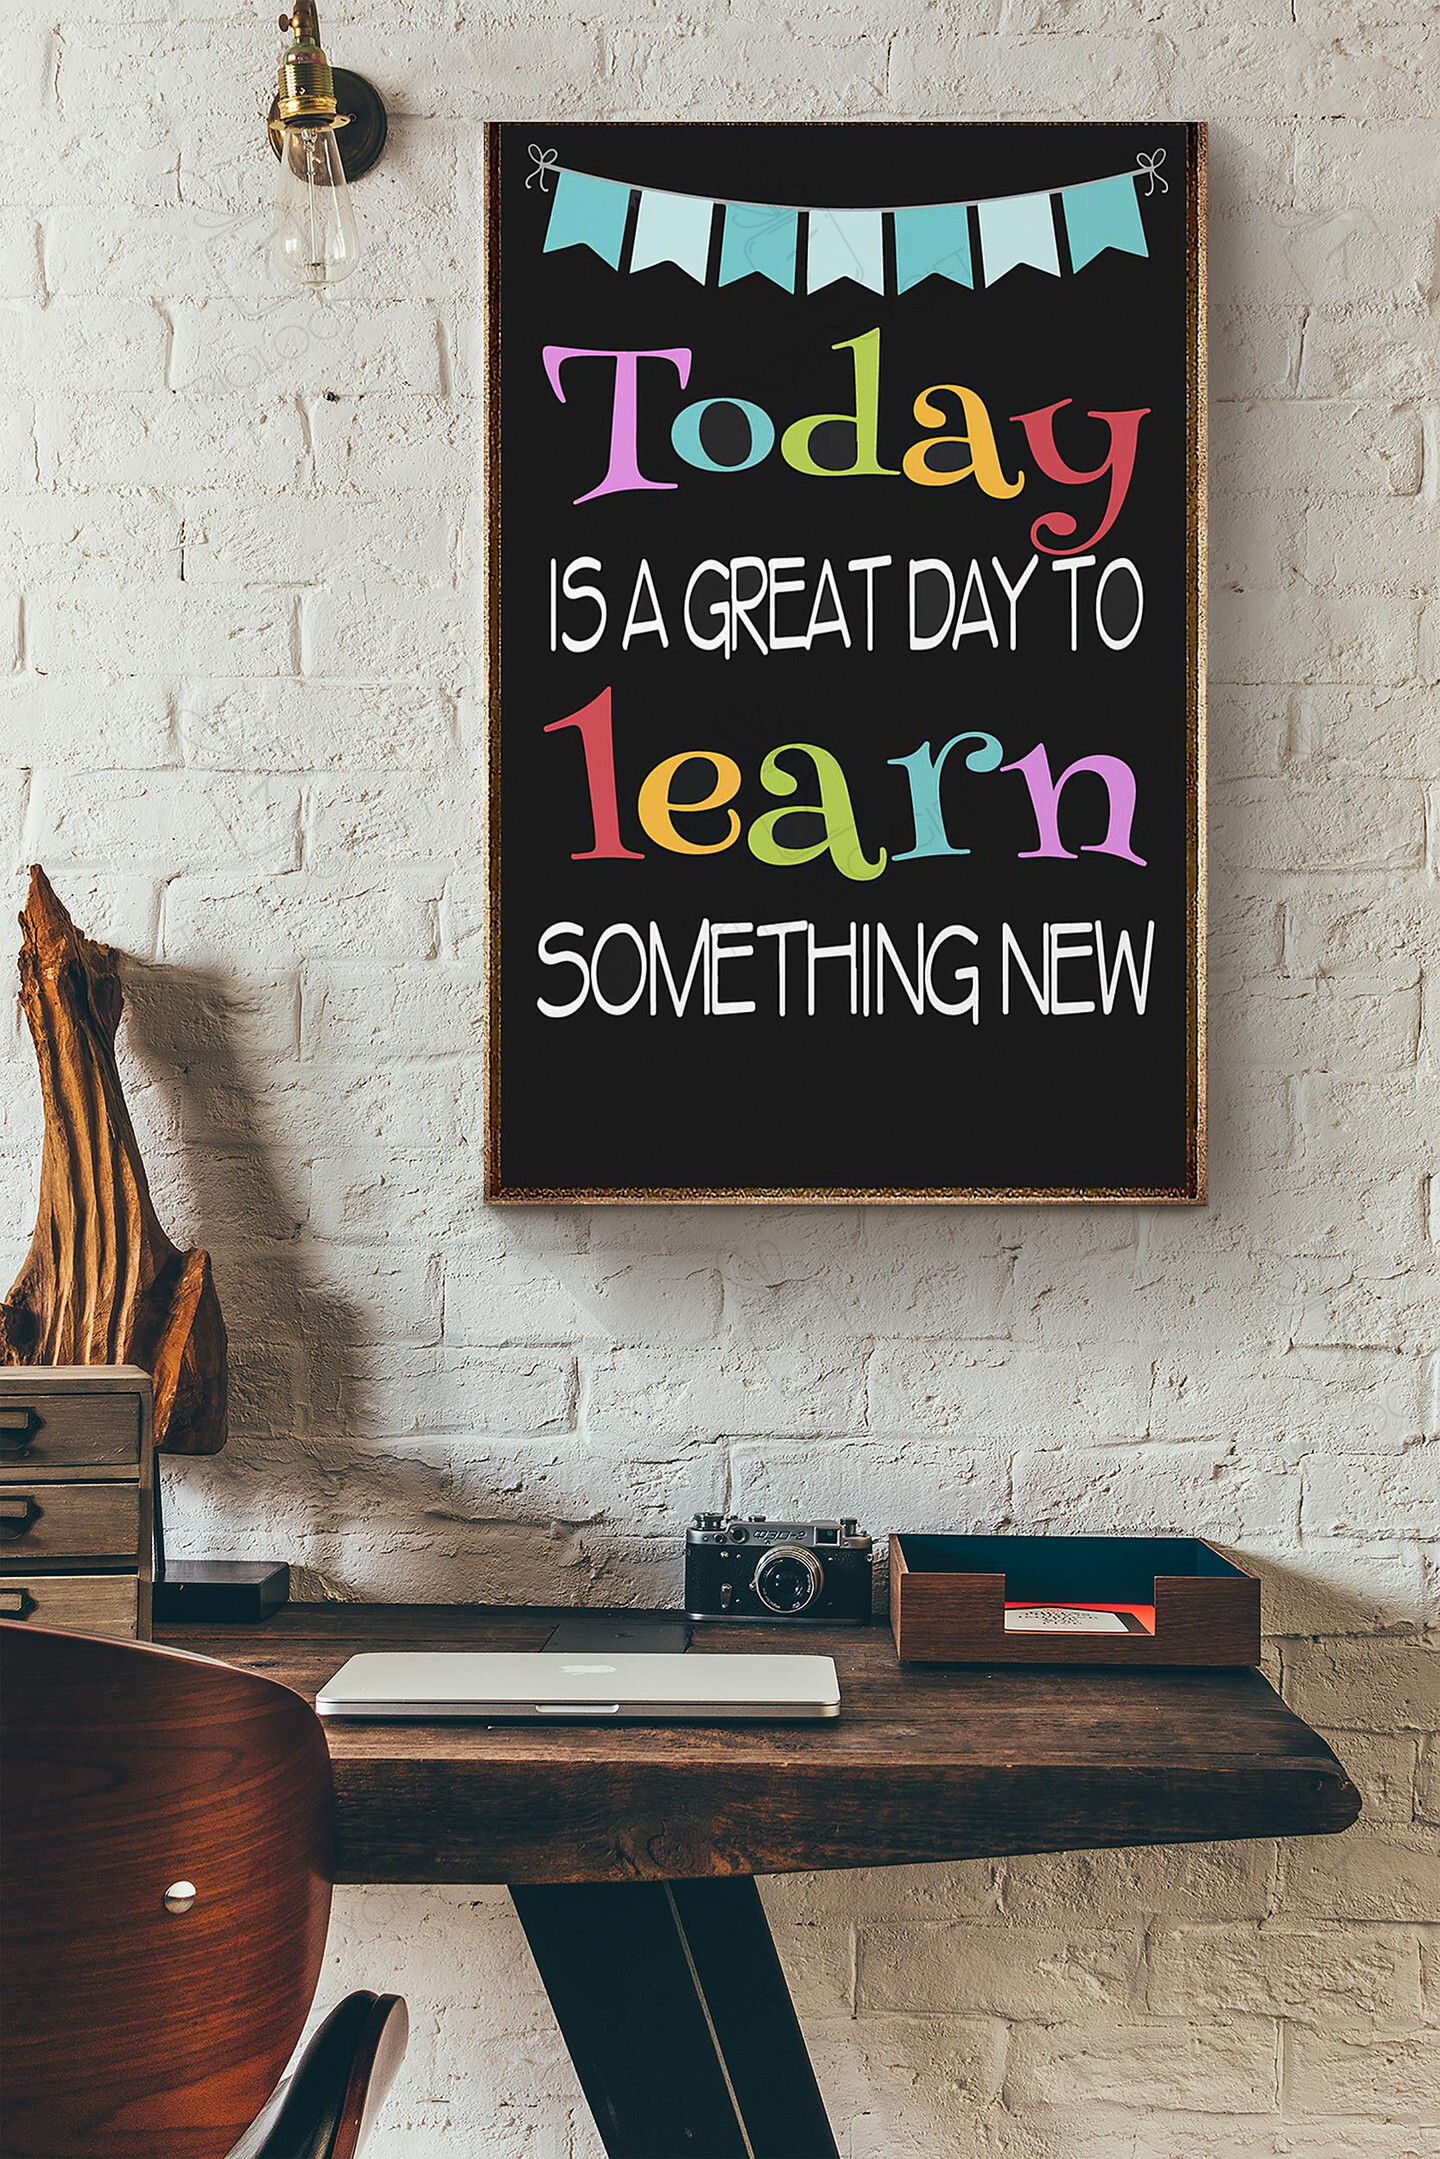 Today Is A Great Day To Learn Something New Inspiration Canvas Painting Ideas, Canvas Hanging Prints, Gift Idea Framed Prints, Canvas Paintings Wrapped Canvas 8x10